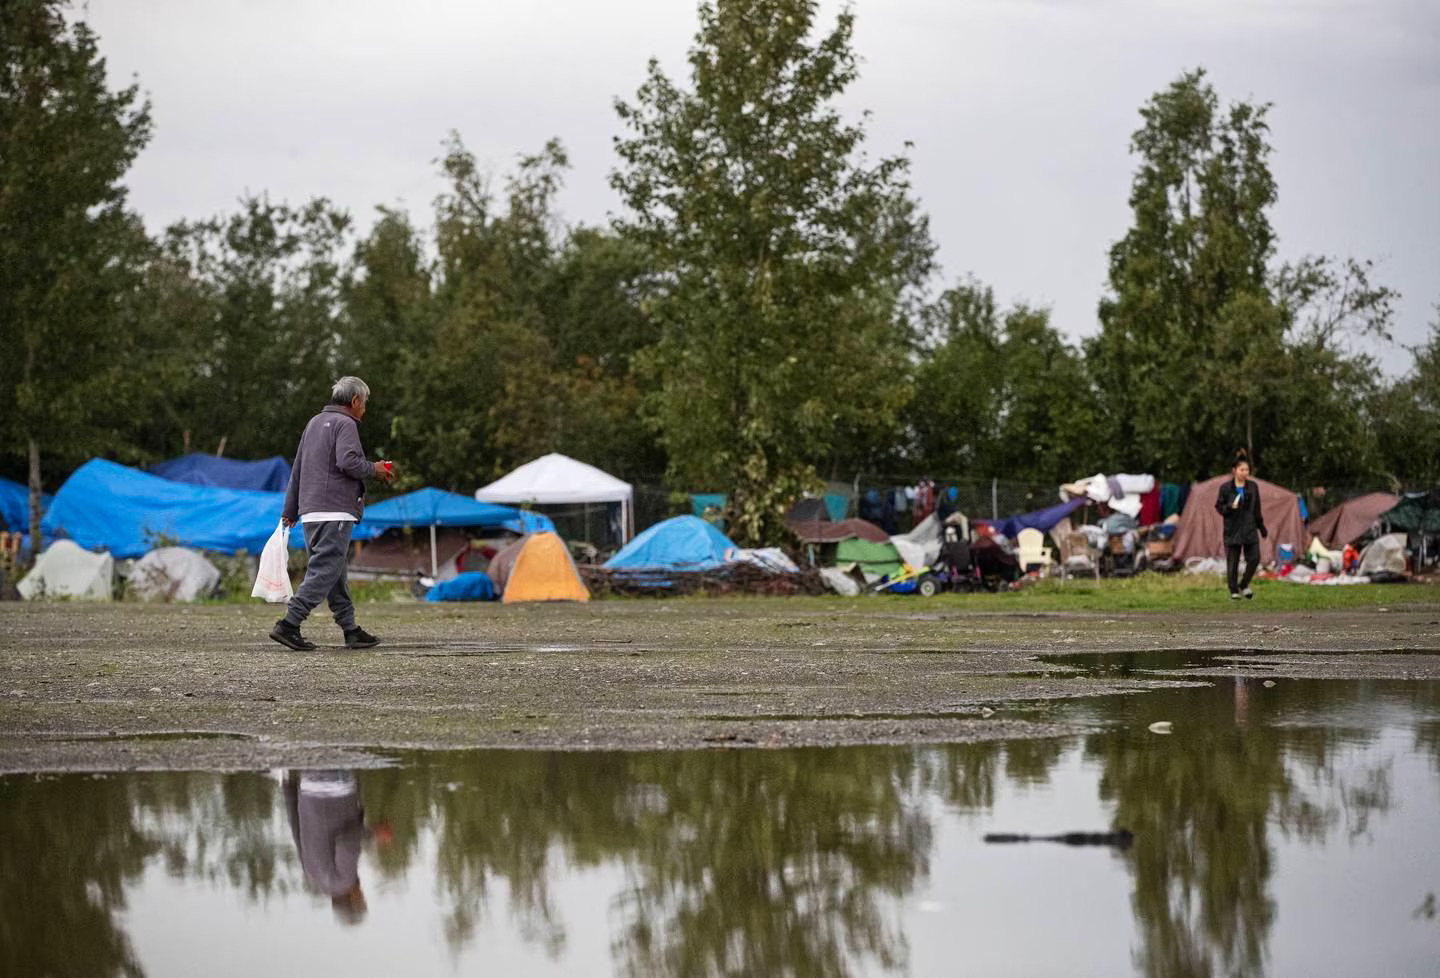 a person walks near a muddy and wet campsite